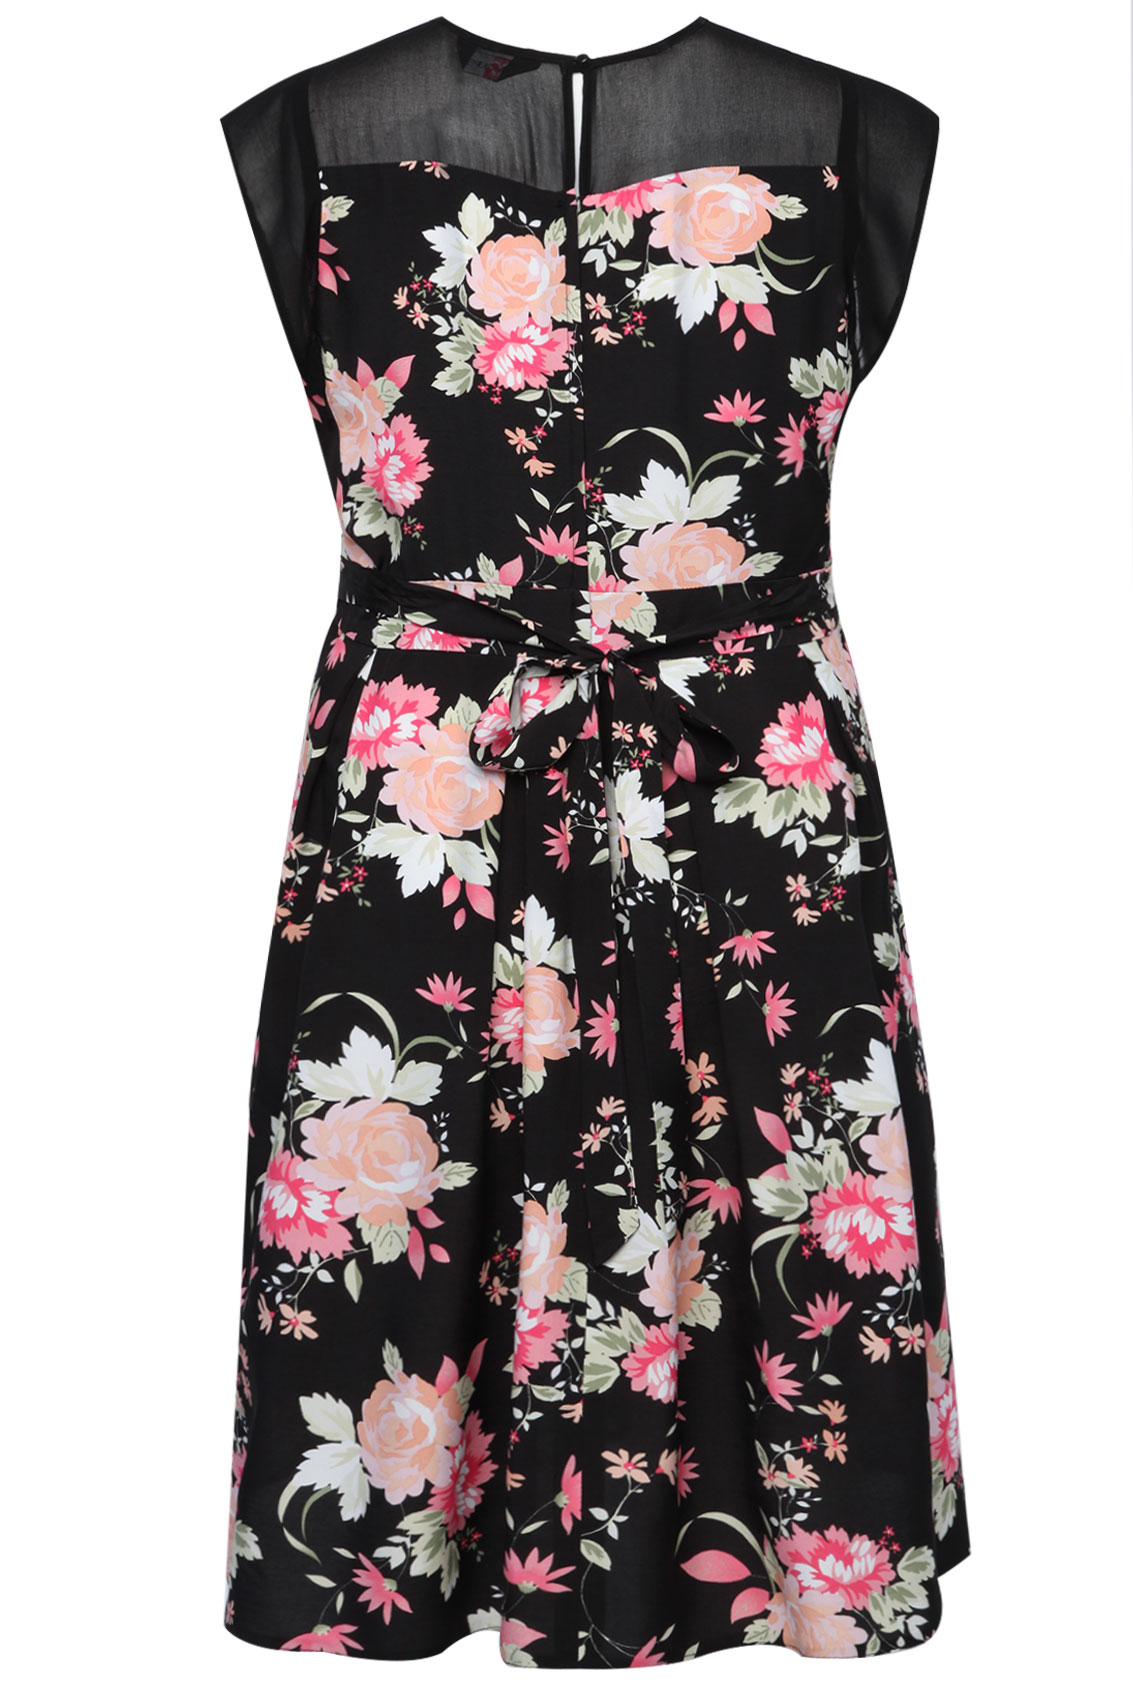 Black And Pink Floral Print Midi Dress With Mesh Insert plus size 16,18 ...